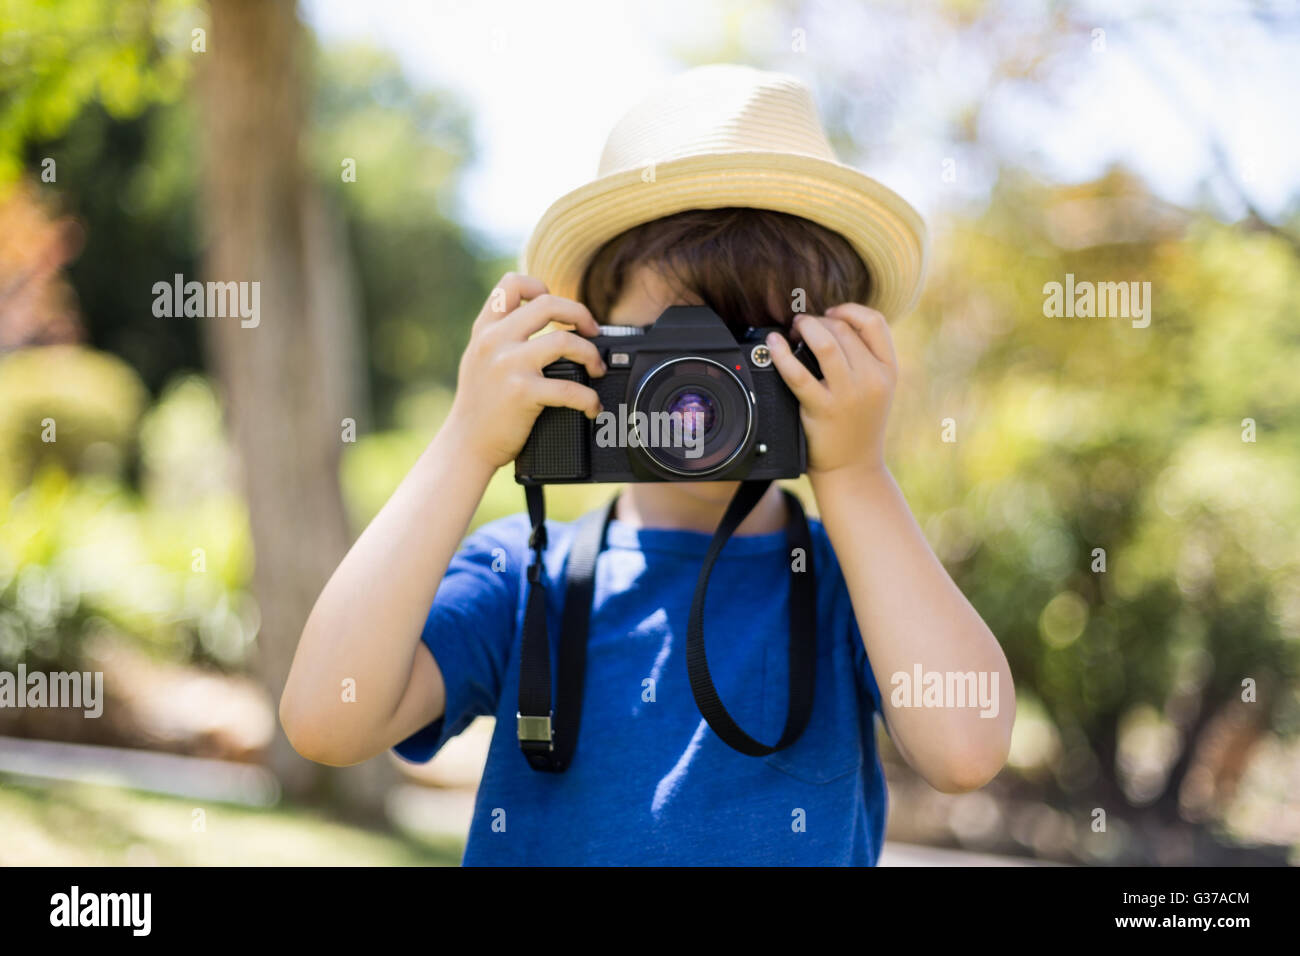 Young boy clicking a photograph from camera Stock Photo